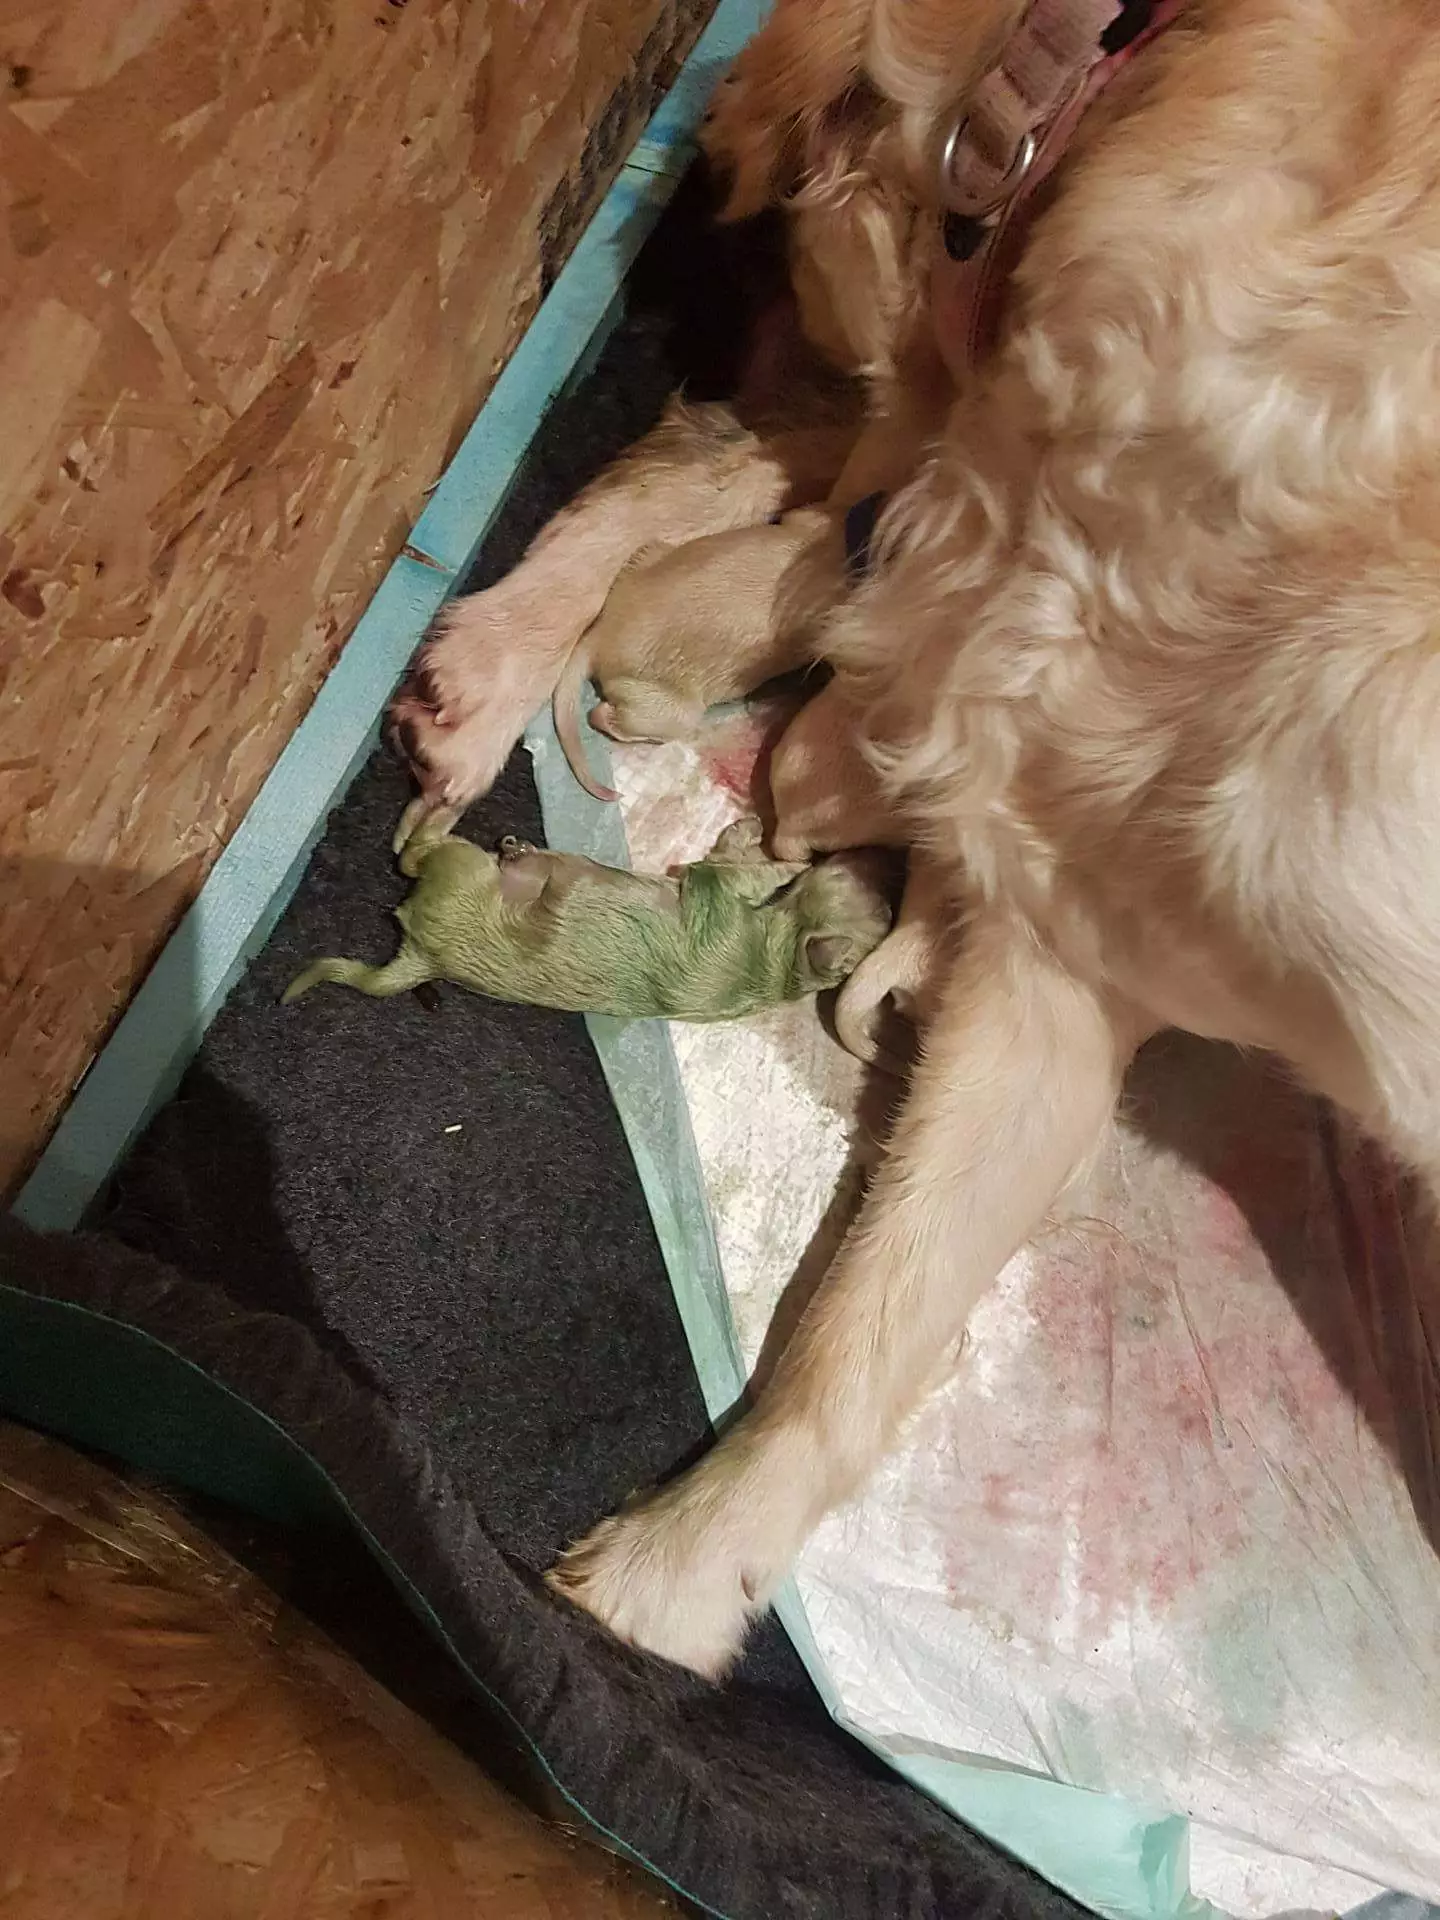 Puppy is born green